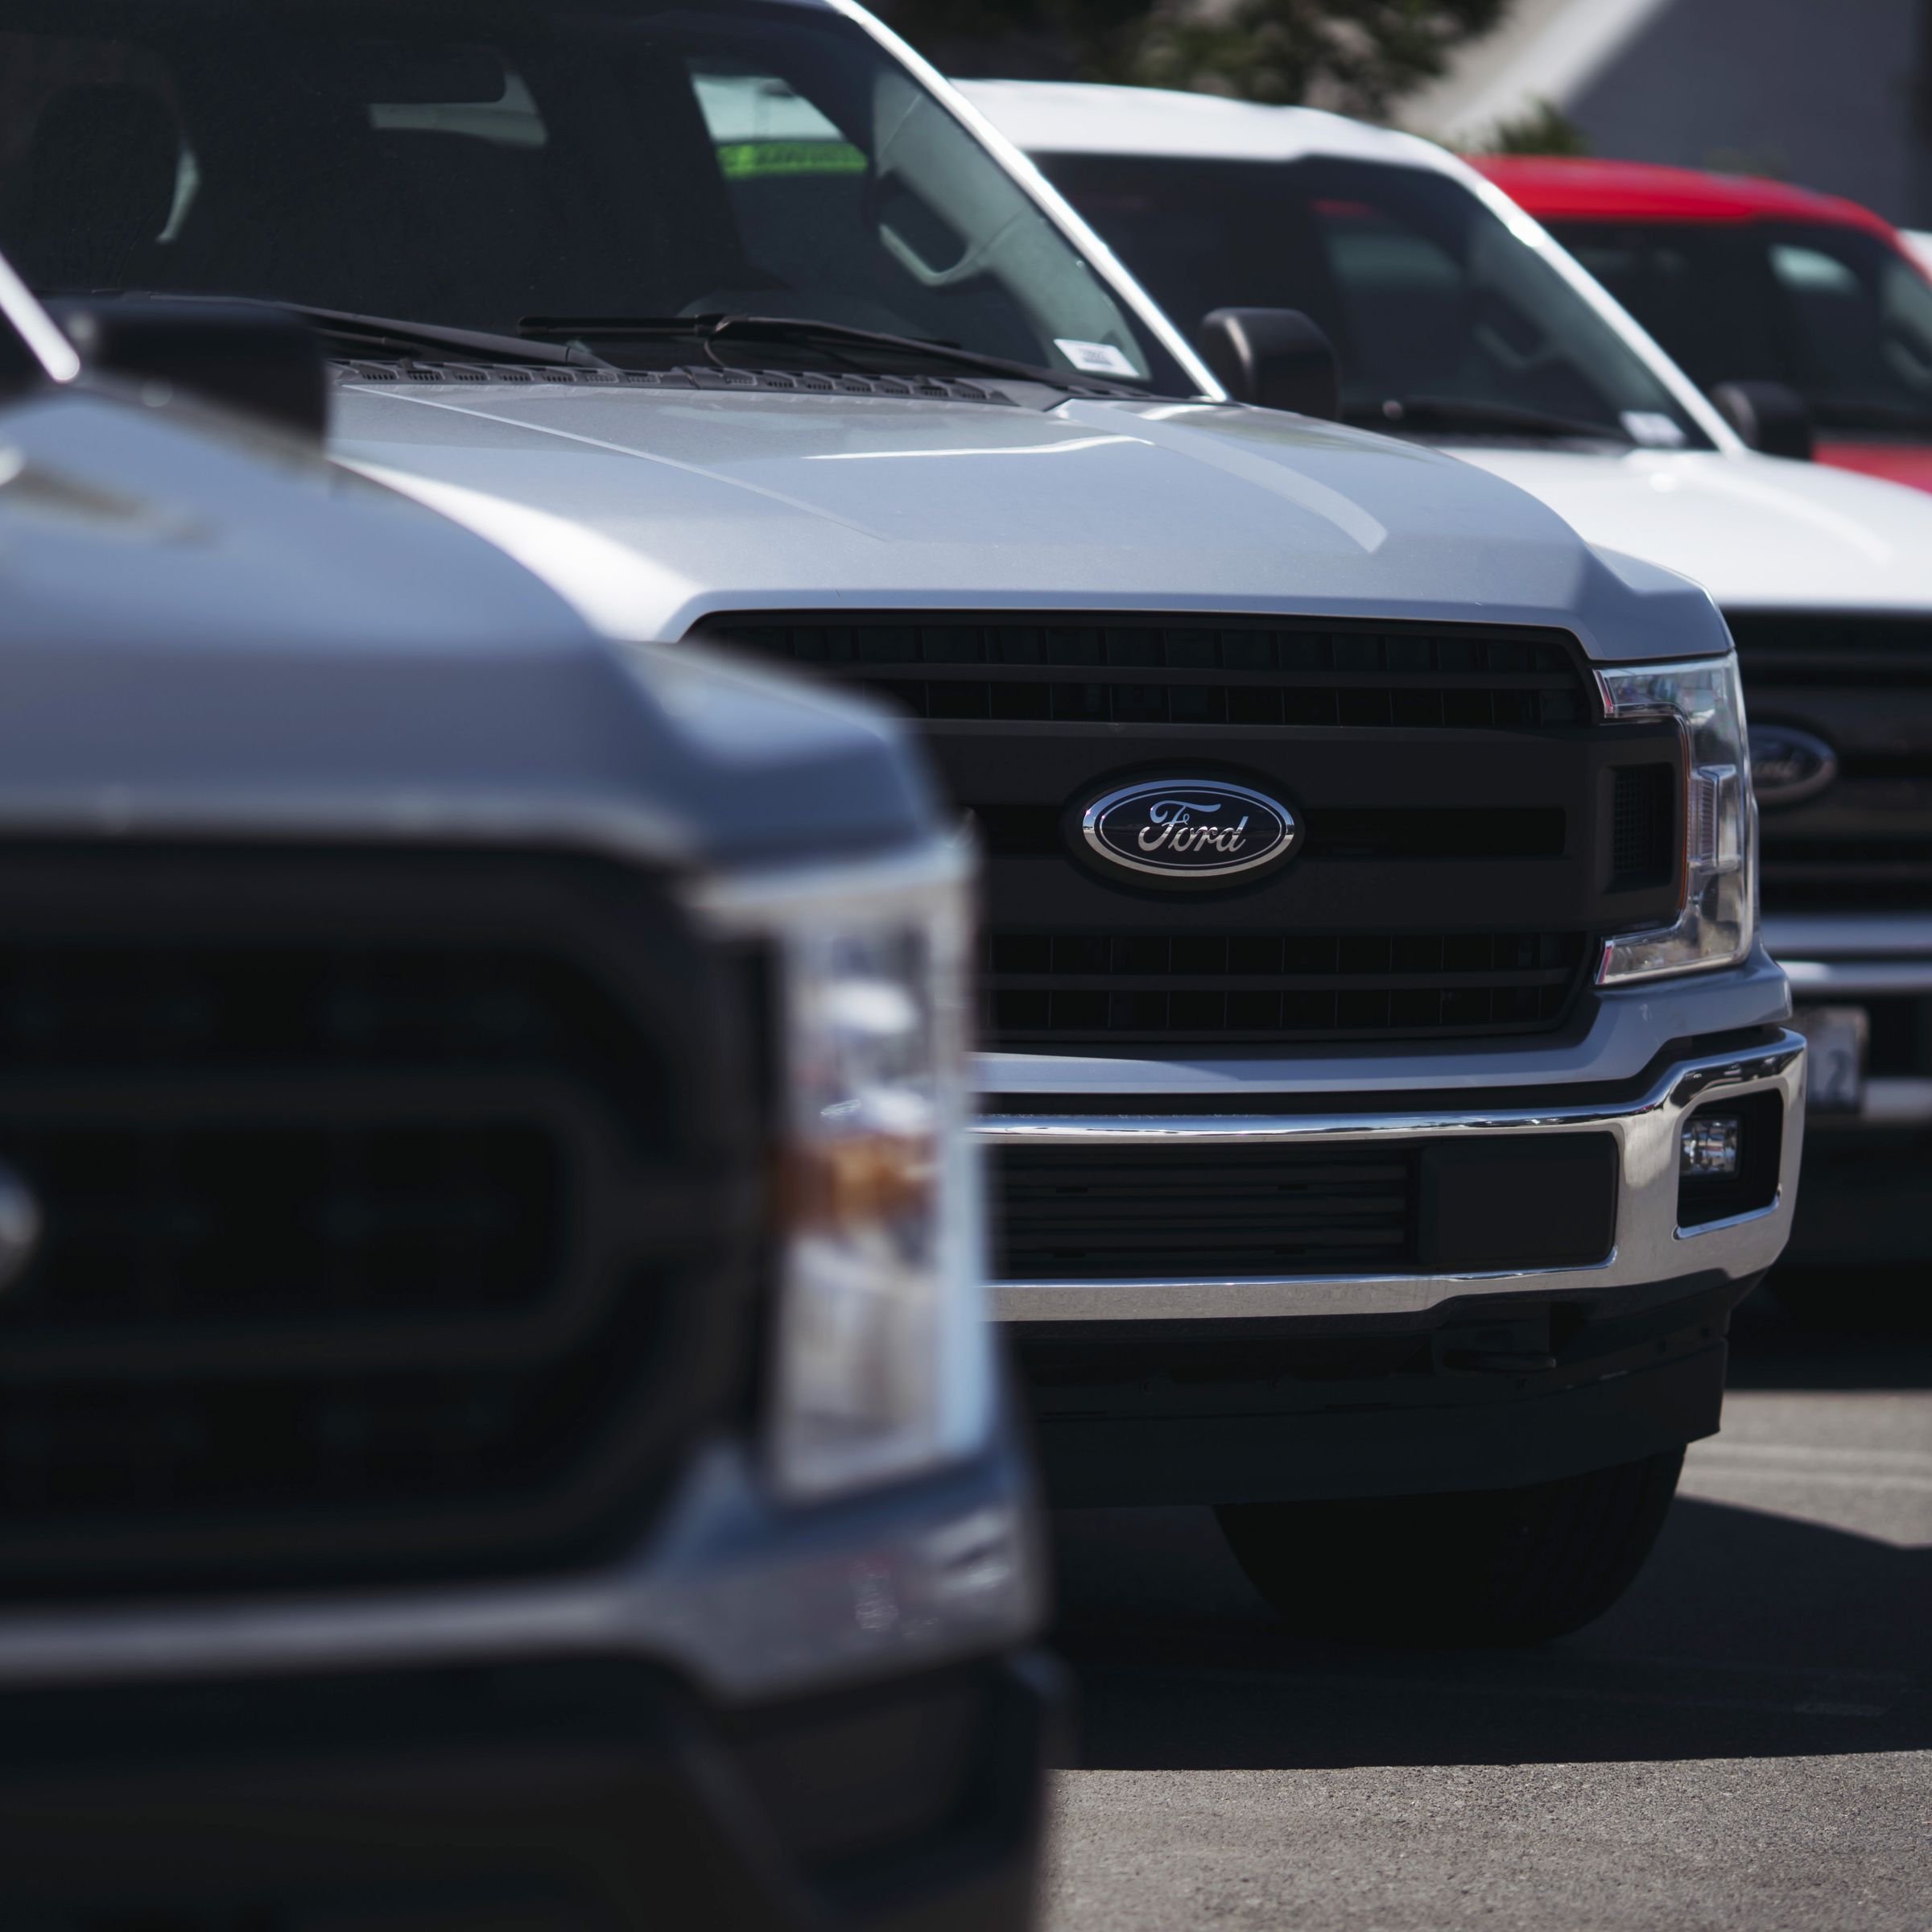 Ford vehicles at a dealership